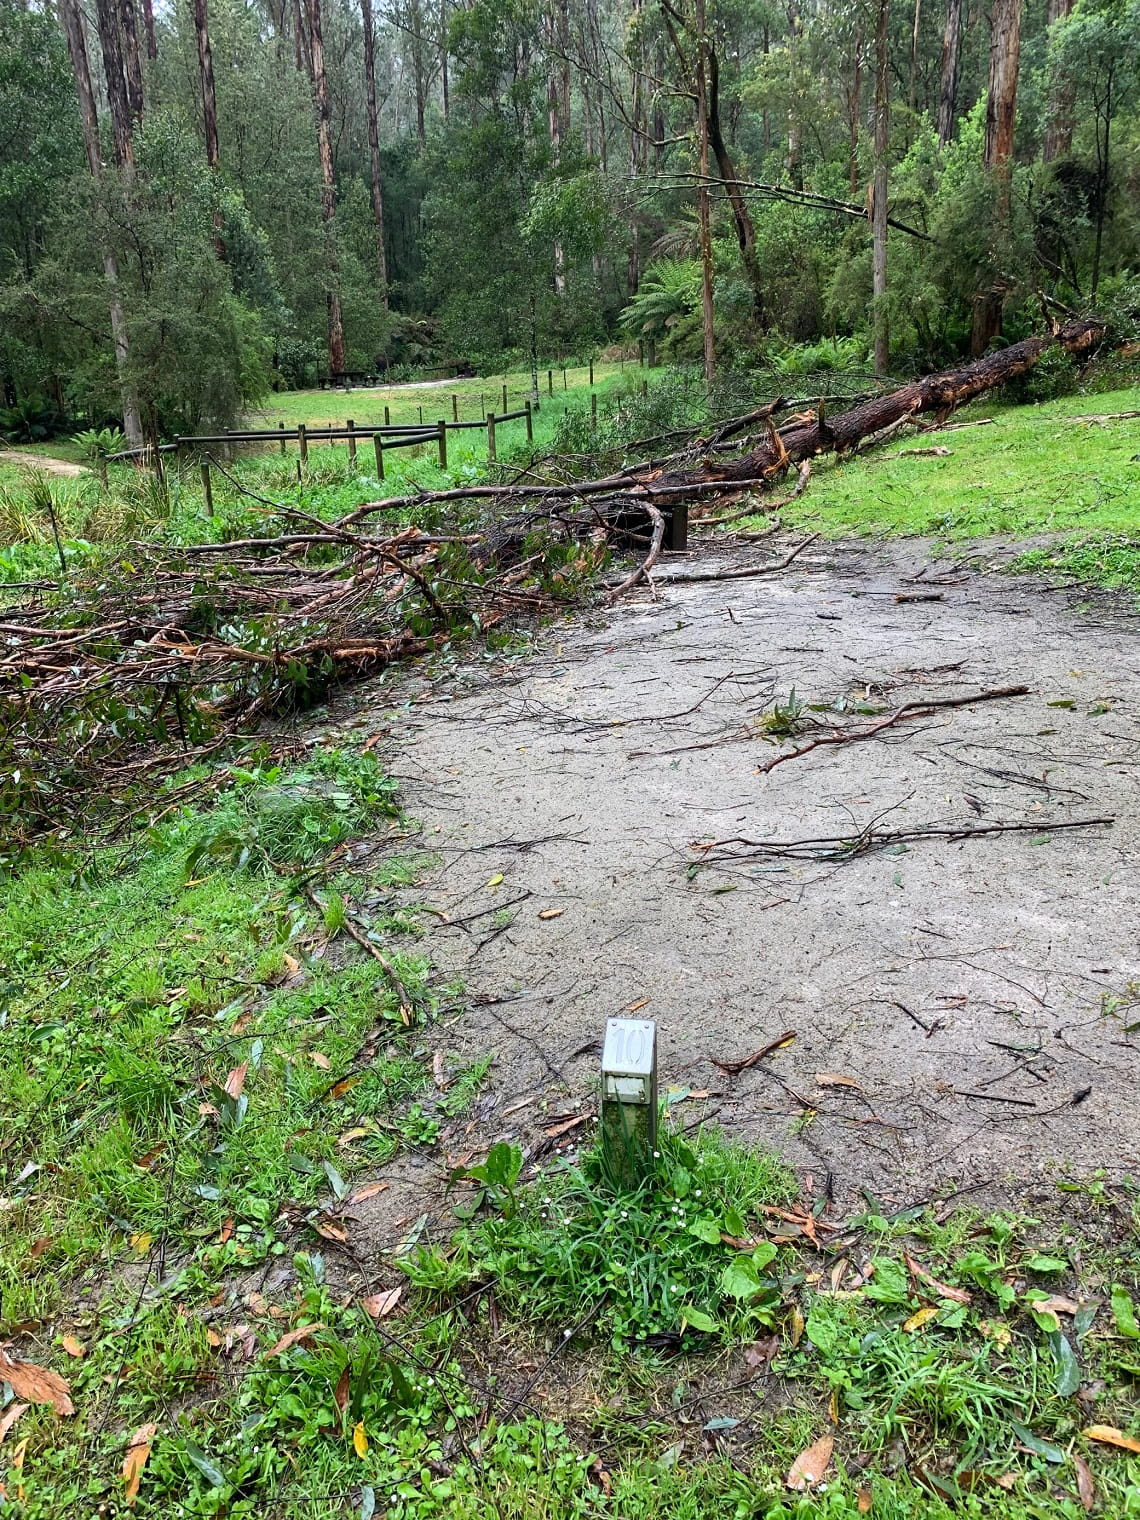  Fallen tree on road. Saturated soil from flood and storm events  the soil in Victorian parks have weakened the health and stability of trees. 